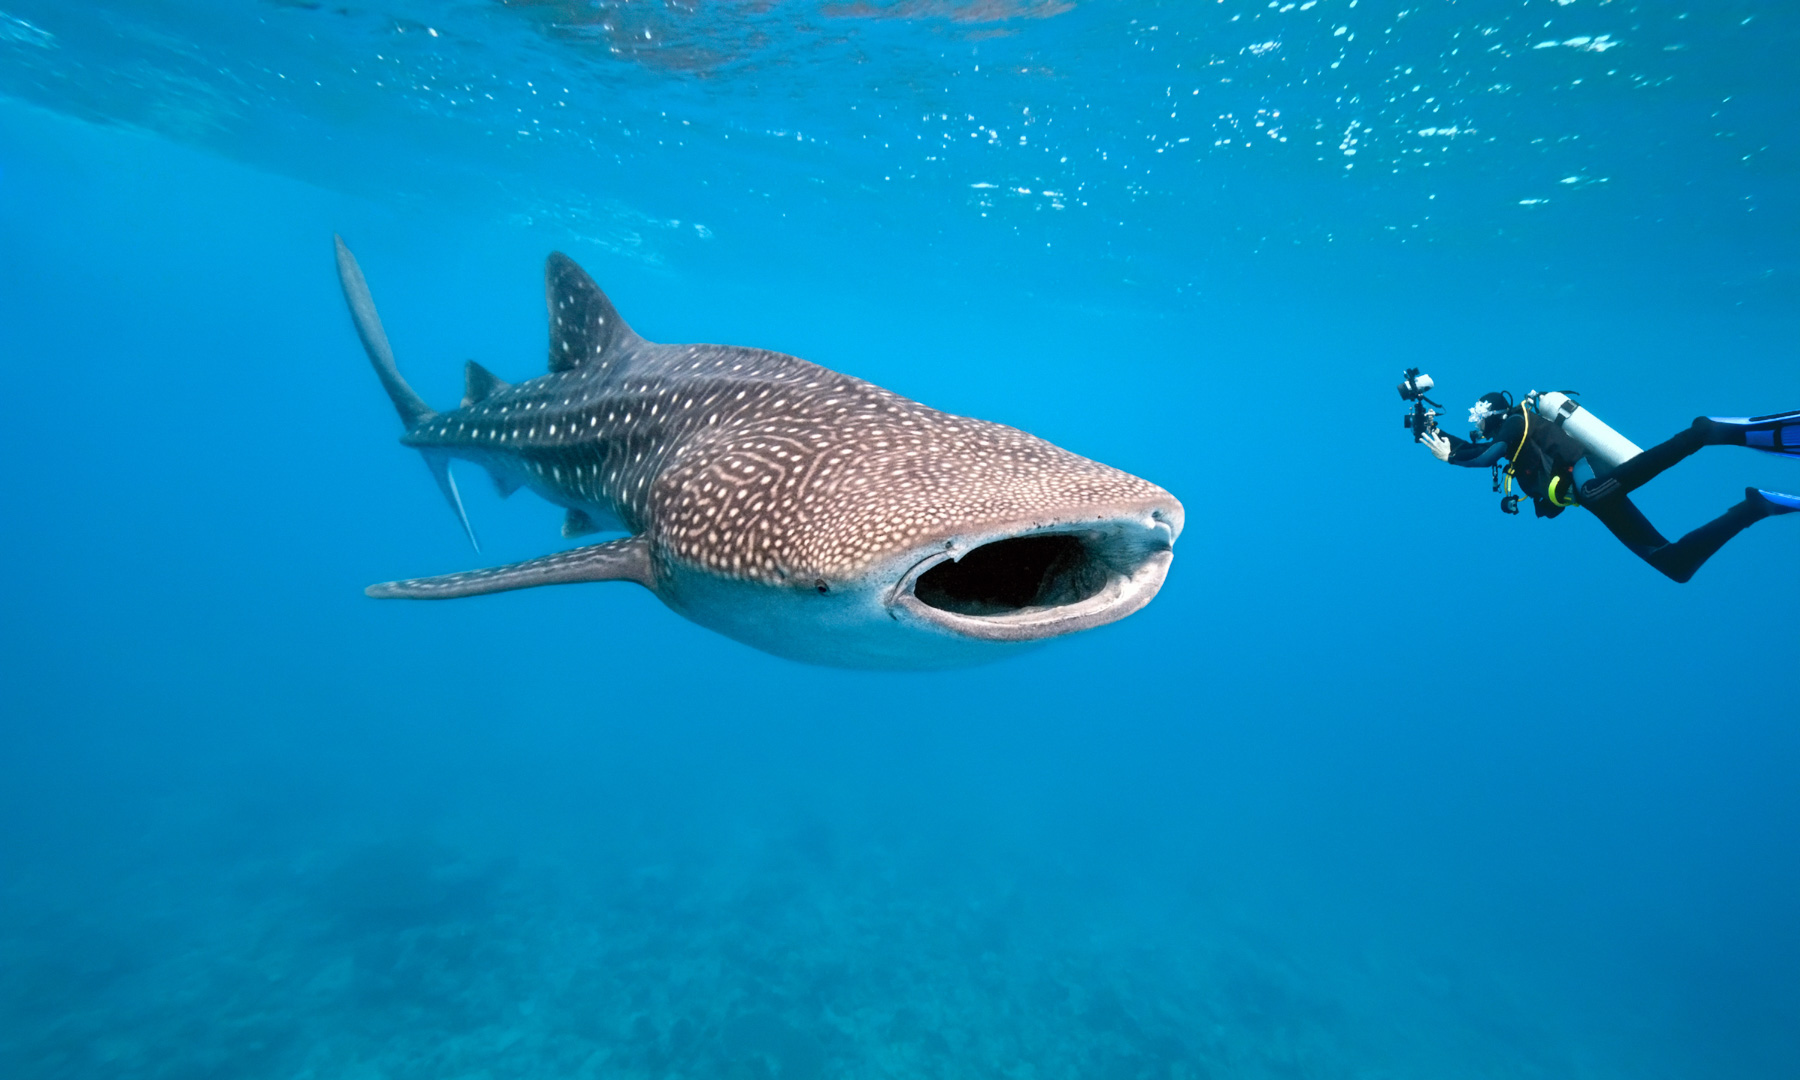 How To Ethically Swim With Whale Sharks